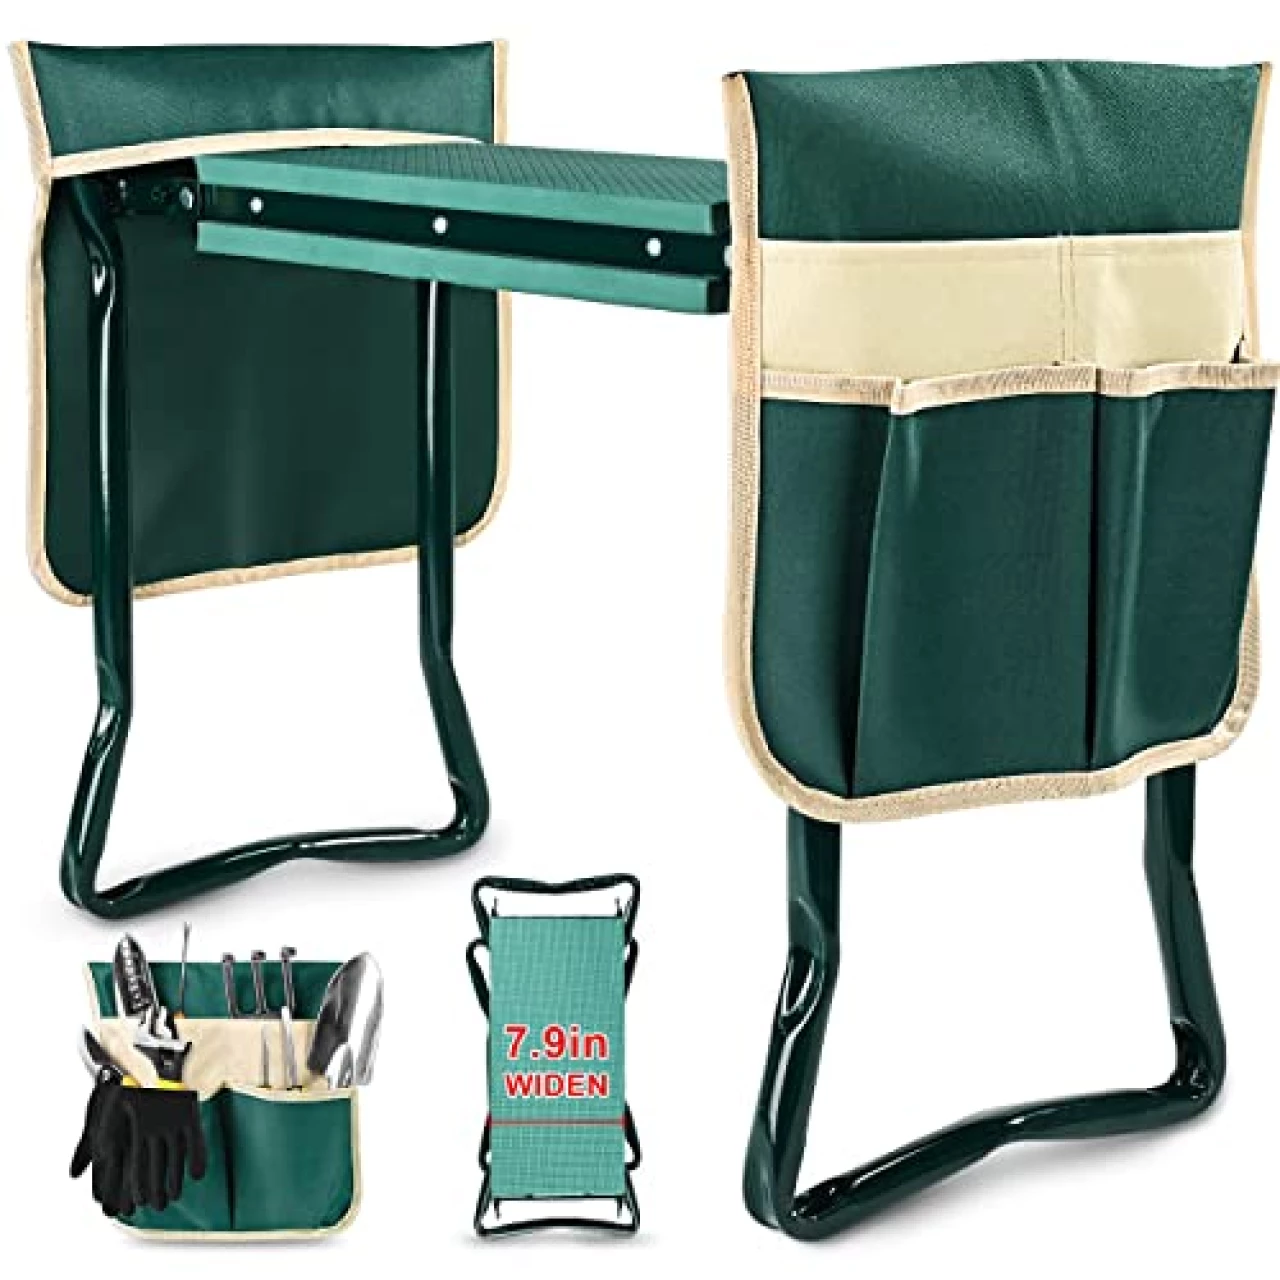 KVR Upgraded Garden Kneeler and Seat with Thicken &amp; Widen Soft Kneeling Pad